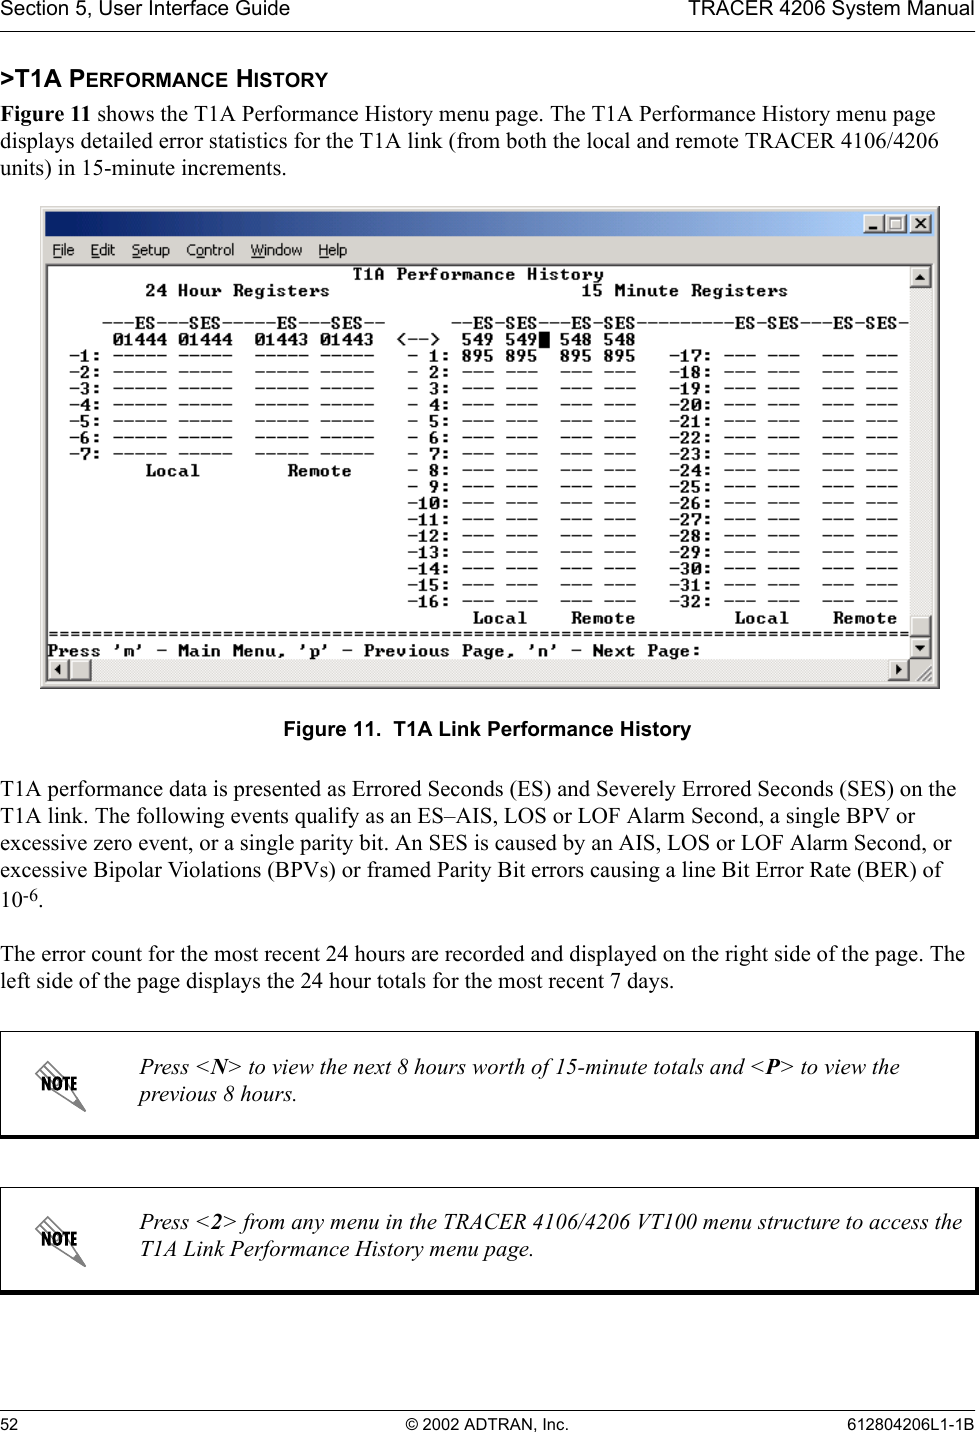 Section 5, User Interface Guide TRACER 4206 System Manual52 © 2002 ADTRAN, Inc. 612804206L1-1B&gt;T1A PERFORMANCE HISTORYFigure 11 shows the T1A Performance History menu page. The T1A Performance History menu page displays detailed error statistics for the T1A link (from both the local and remote TRACER 4106/4206 units) in 15-minute increments. Figure 11.  T1A Link Performance HistoryT1A performance data is presented as Errored Seconds (ES) and Severely Errored Seconds (SES) on the T1A link. The following events qualify as an ES–AIS, LOS or LOF Alarm Second, a single BPV or excessive zero event, or a single parity bit. An SES is caused by an AIS, LOS or LOF Alarm Second, or excessive Bipolar Violations (BPVs) or framed Parity Bit errors causing a line Bit Error Rate (BER) of 10-6.The error count for the most recent 24 hours are recorded and displayed on the right side of the page. The left side of the page displays the 24 hour totals for the most recent 7 days.Press &lt;N&gt; to view the next 8 hours worth of 15-minute totals and &lt;P&gt; to view the previous 8 hours.Press &lt;2&gt; from any menu in the TRACER 4106/4206 VT100 menu structure to access the T1A Link Performance History menu page.